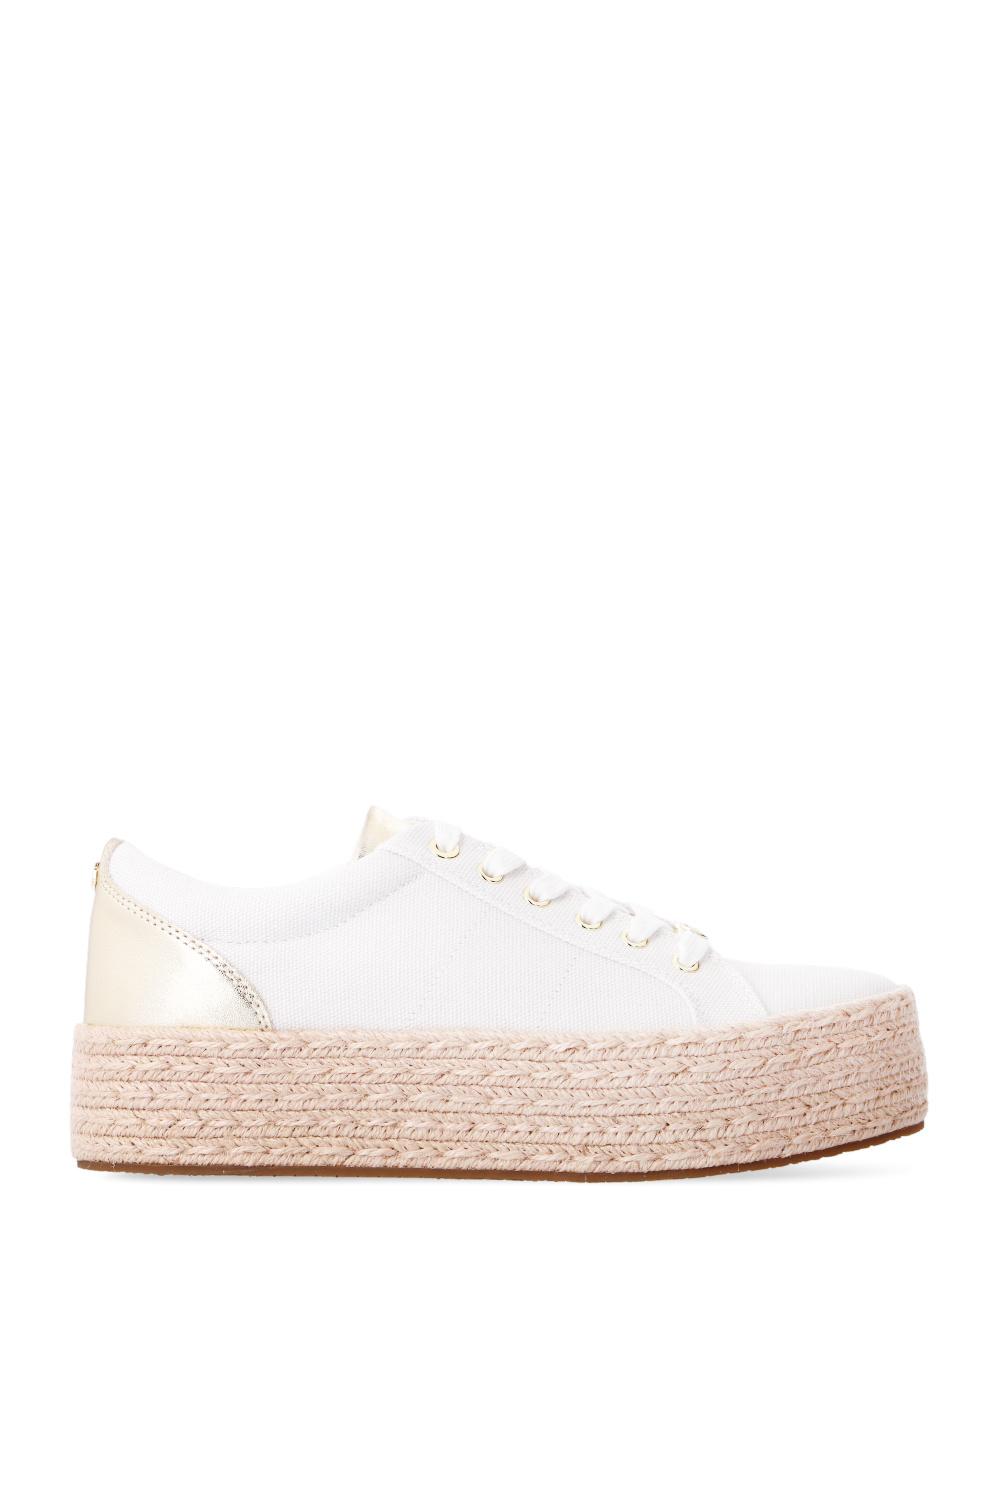 MICHAEL Michael Kors 'libby' Sneakers in White | Lyst